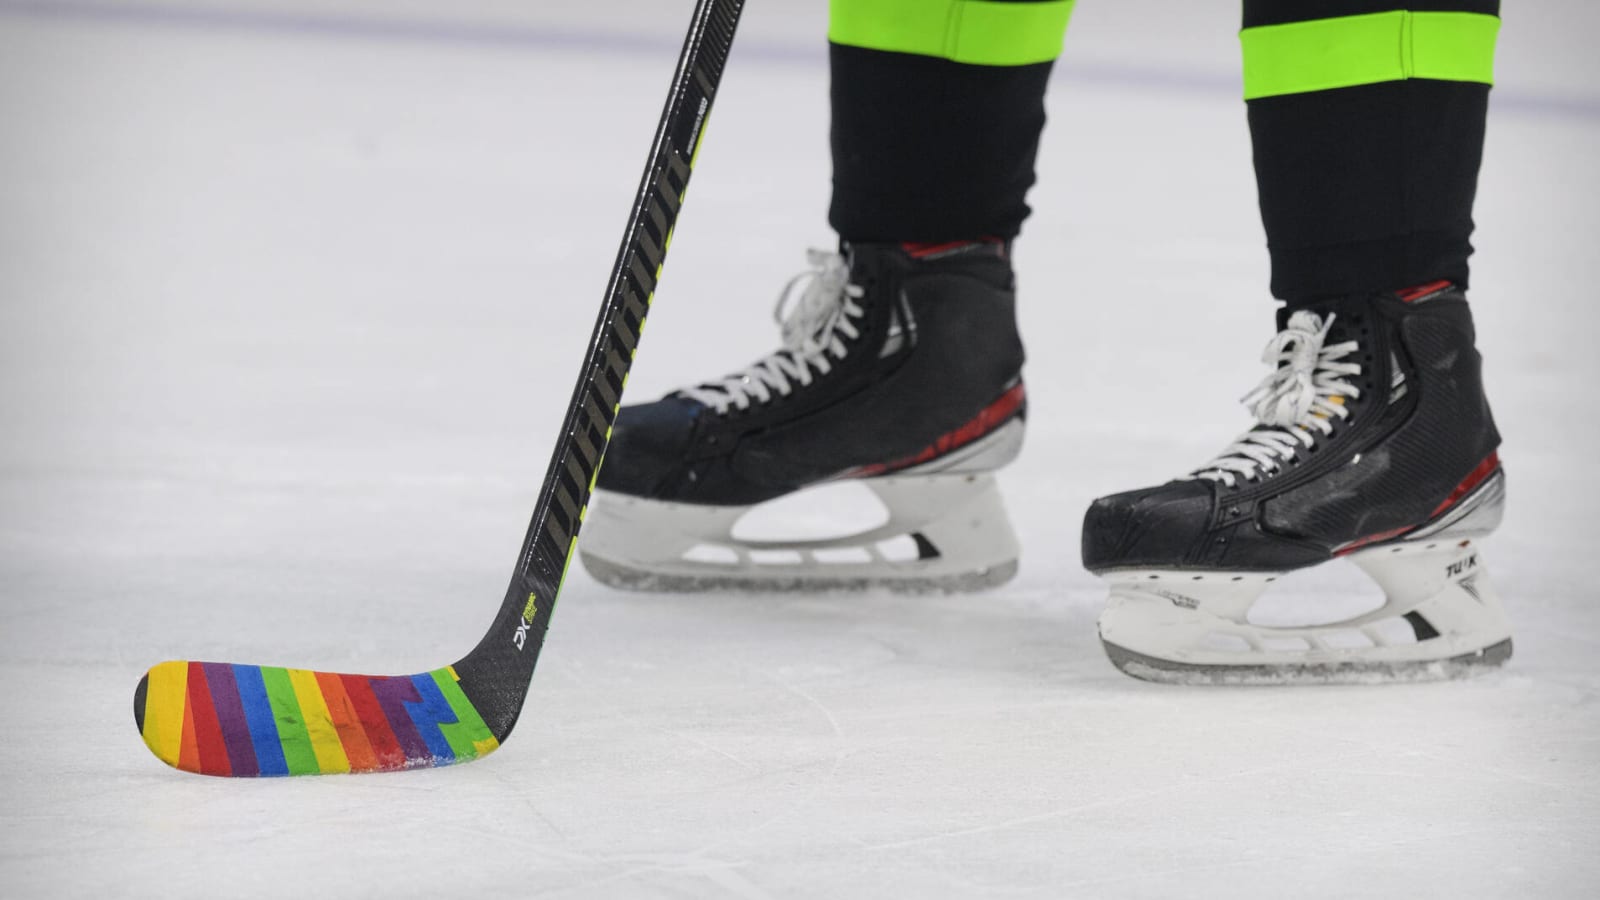 NHL takes a step back in diversity initiative with pride tape ban